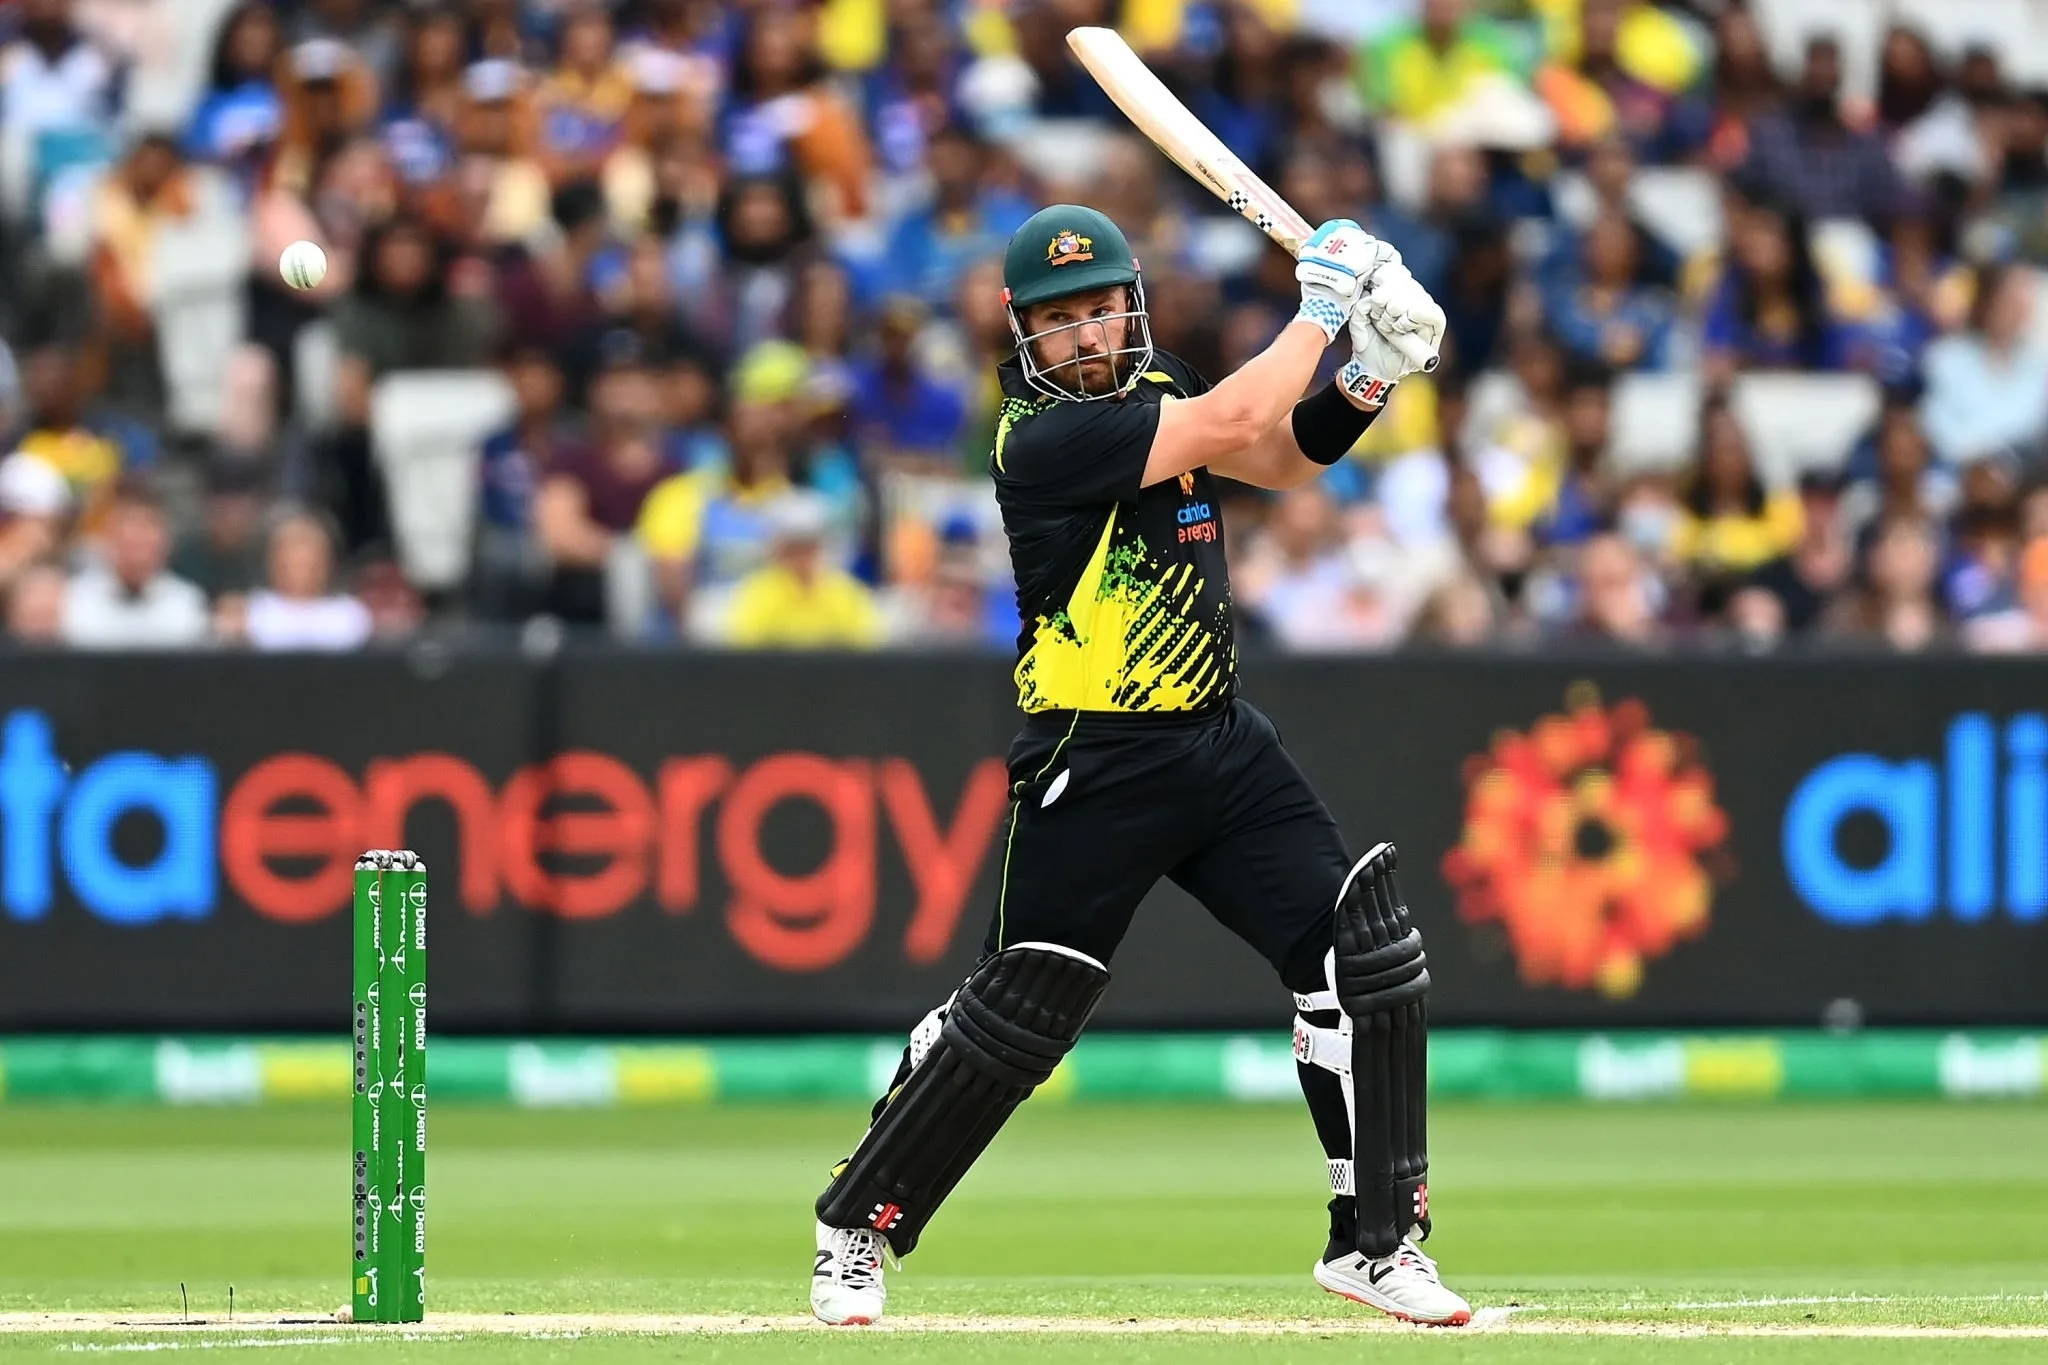 The End of an Era: Aaron Finch Retires From World Cricket